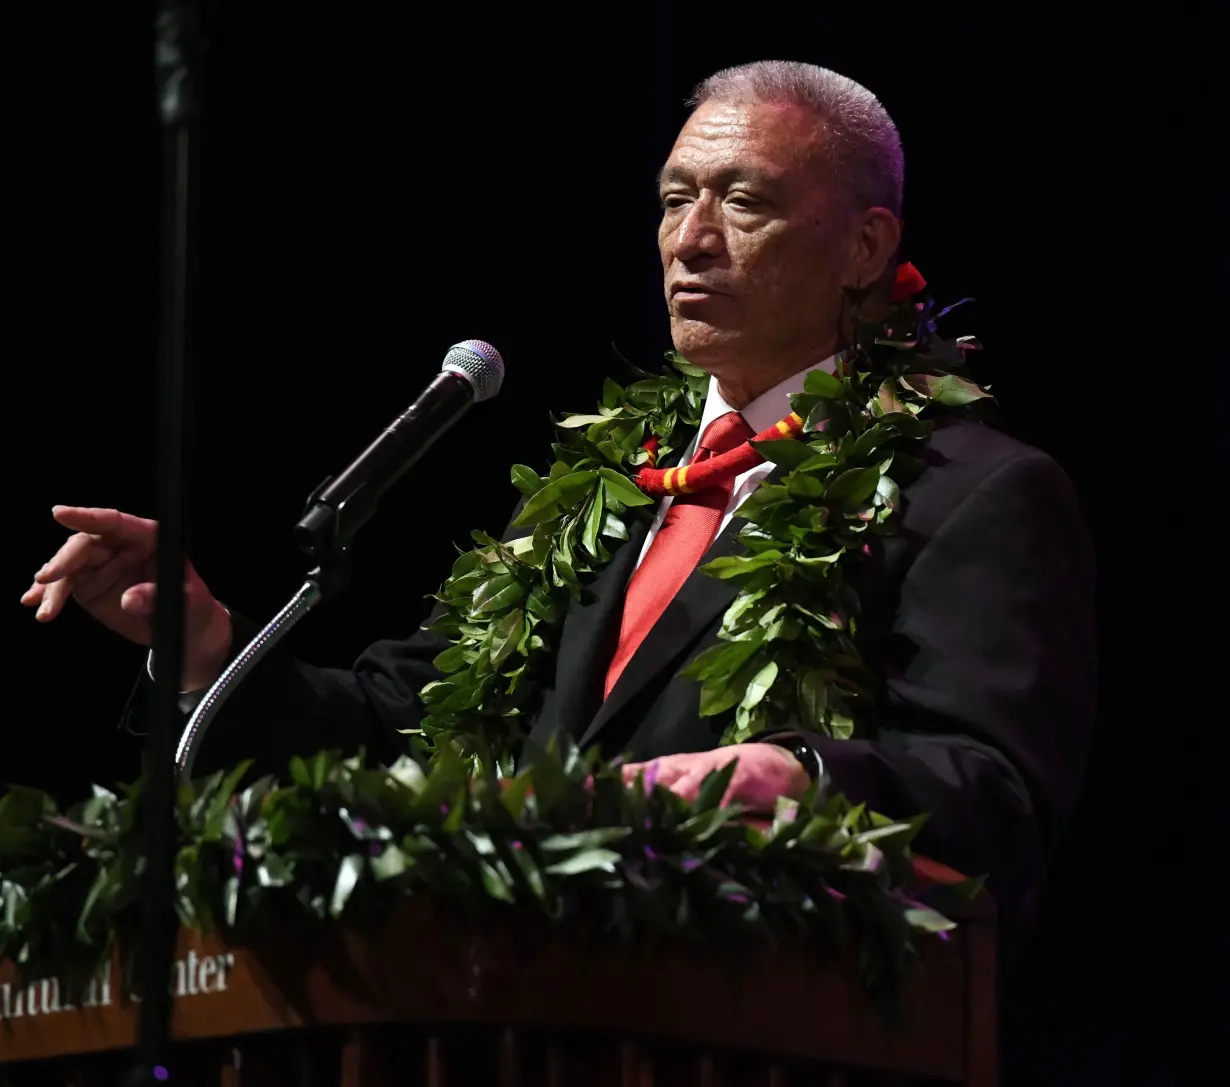 LA Post: Maui's mayor prioritizes housing and vows to hire more firefighters after Lahaina wildfire